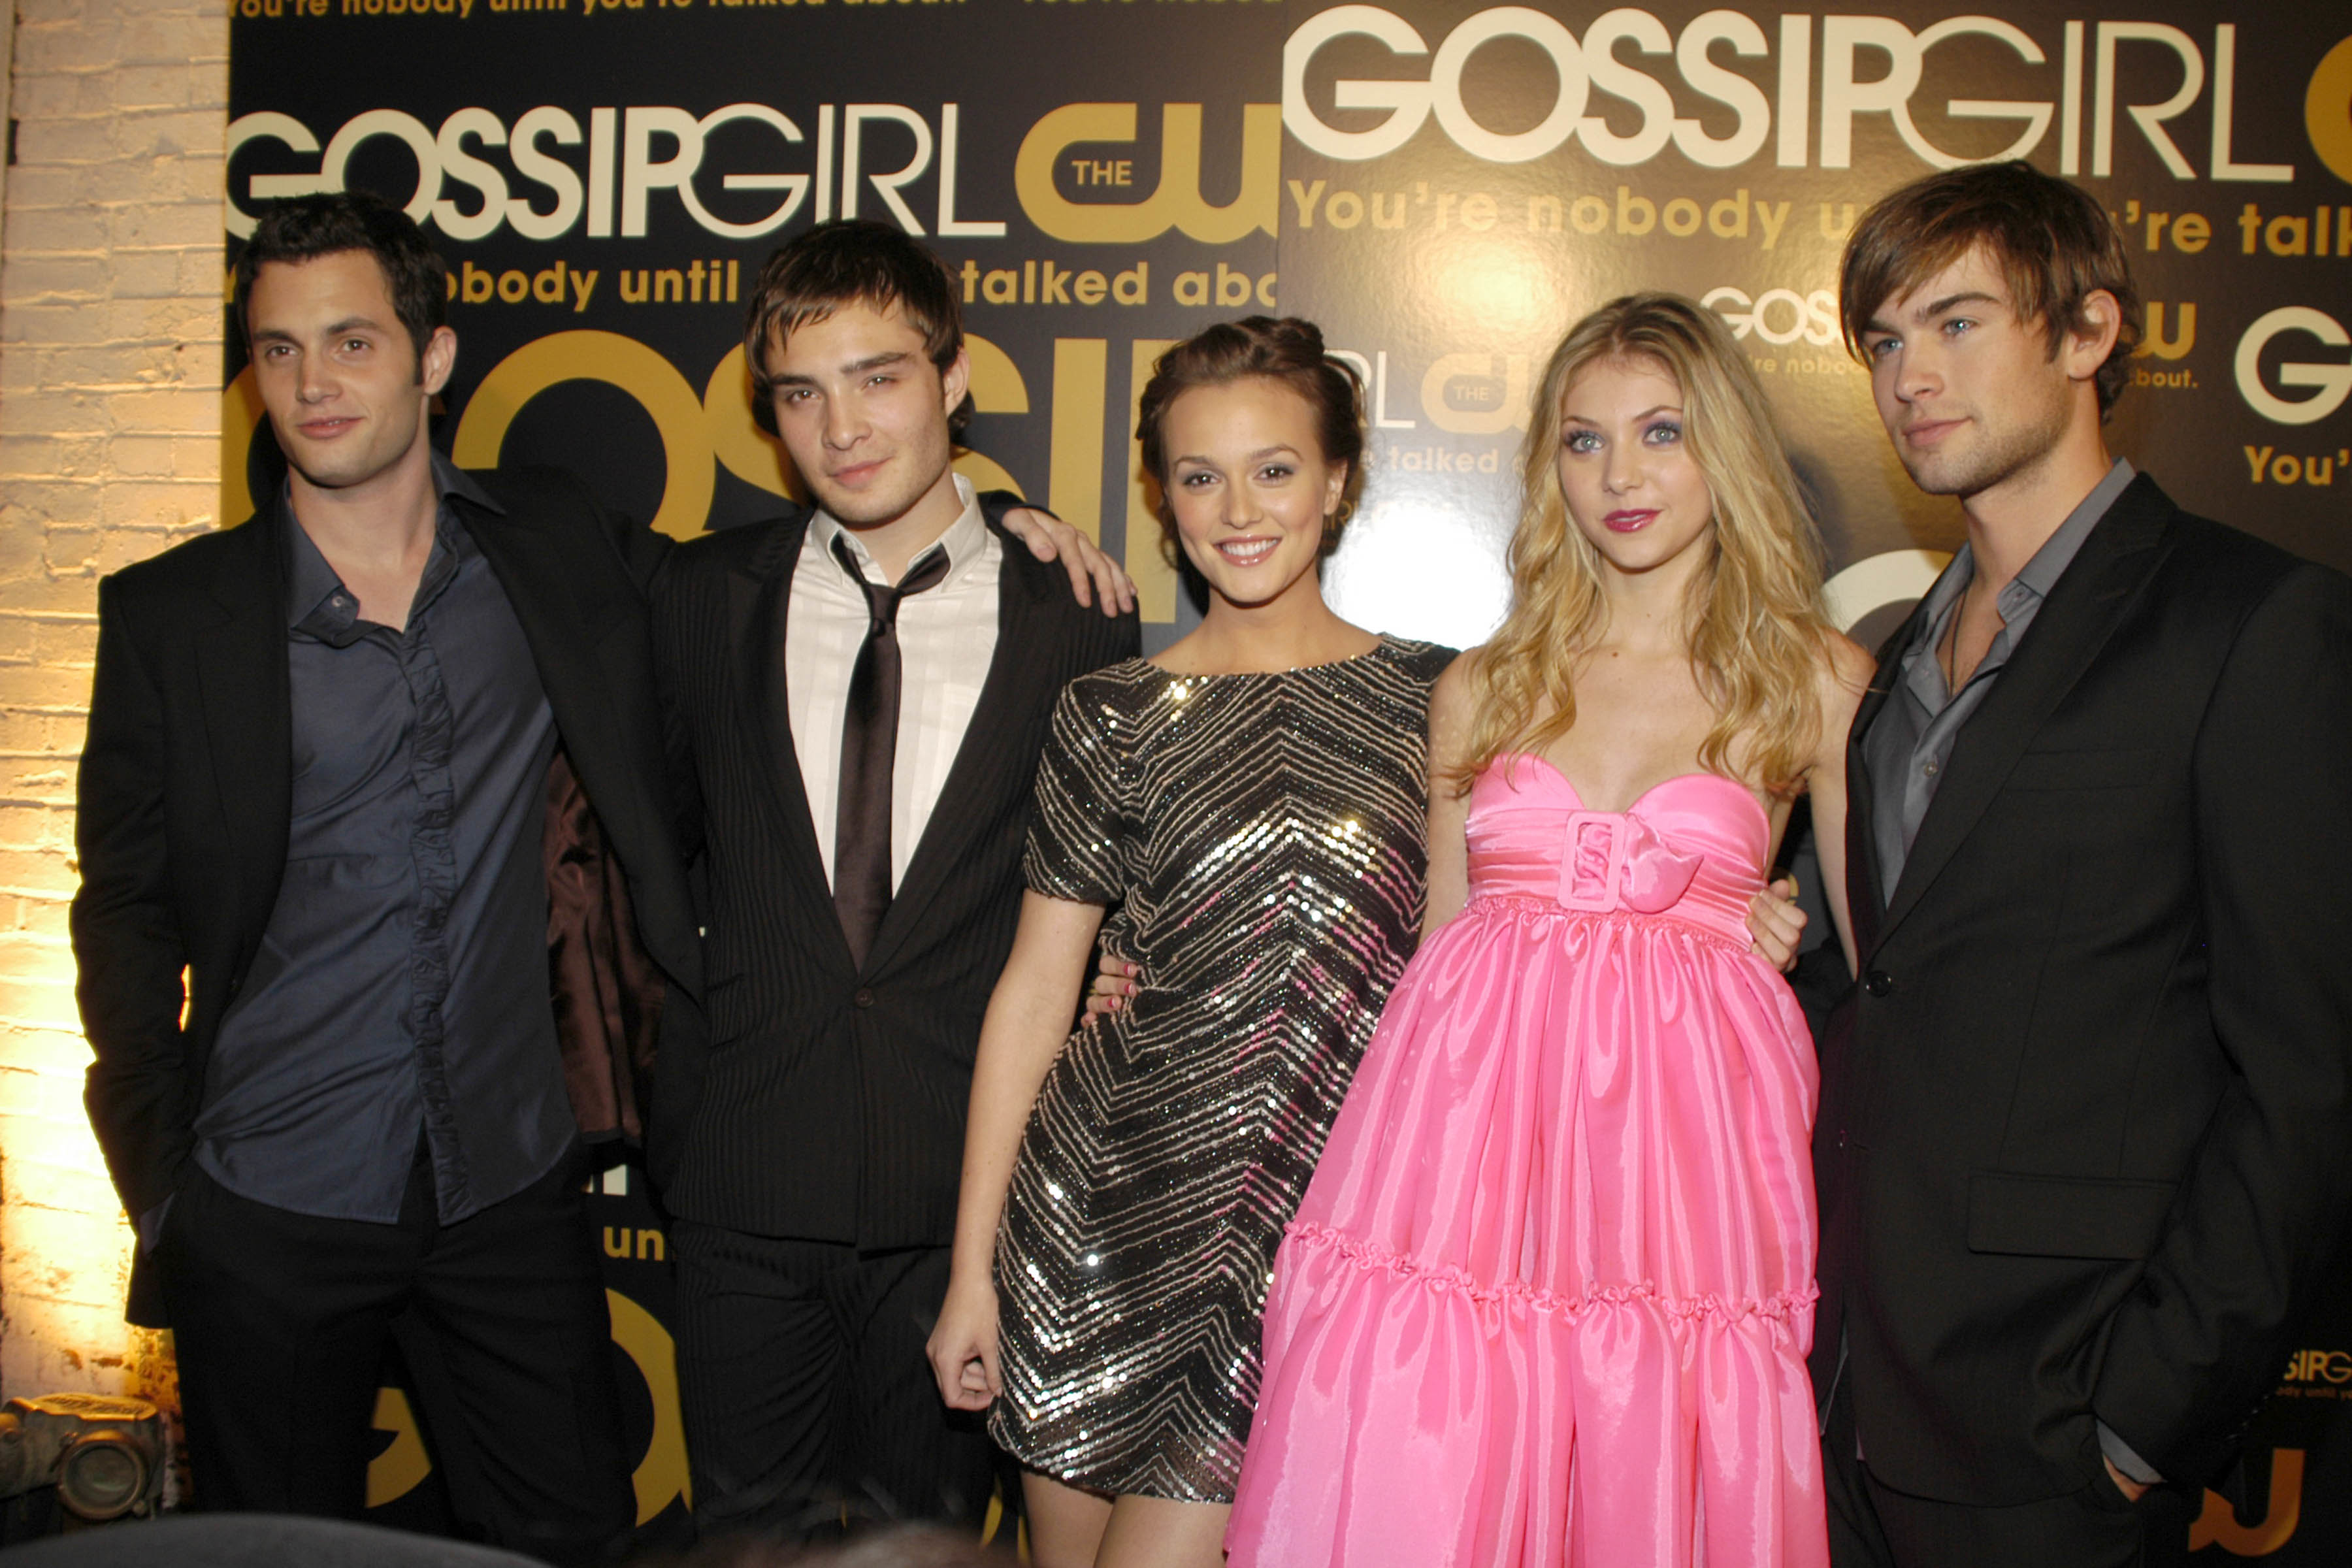 The cast of Gossip Girl at a media event